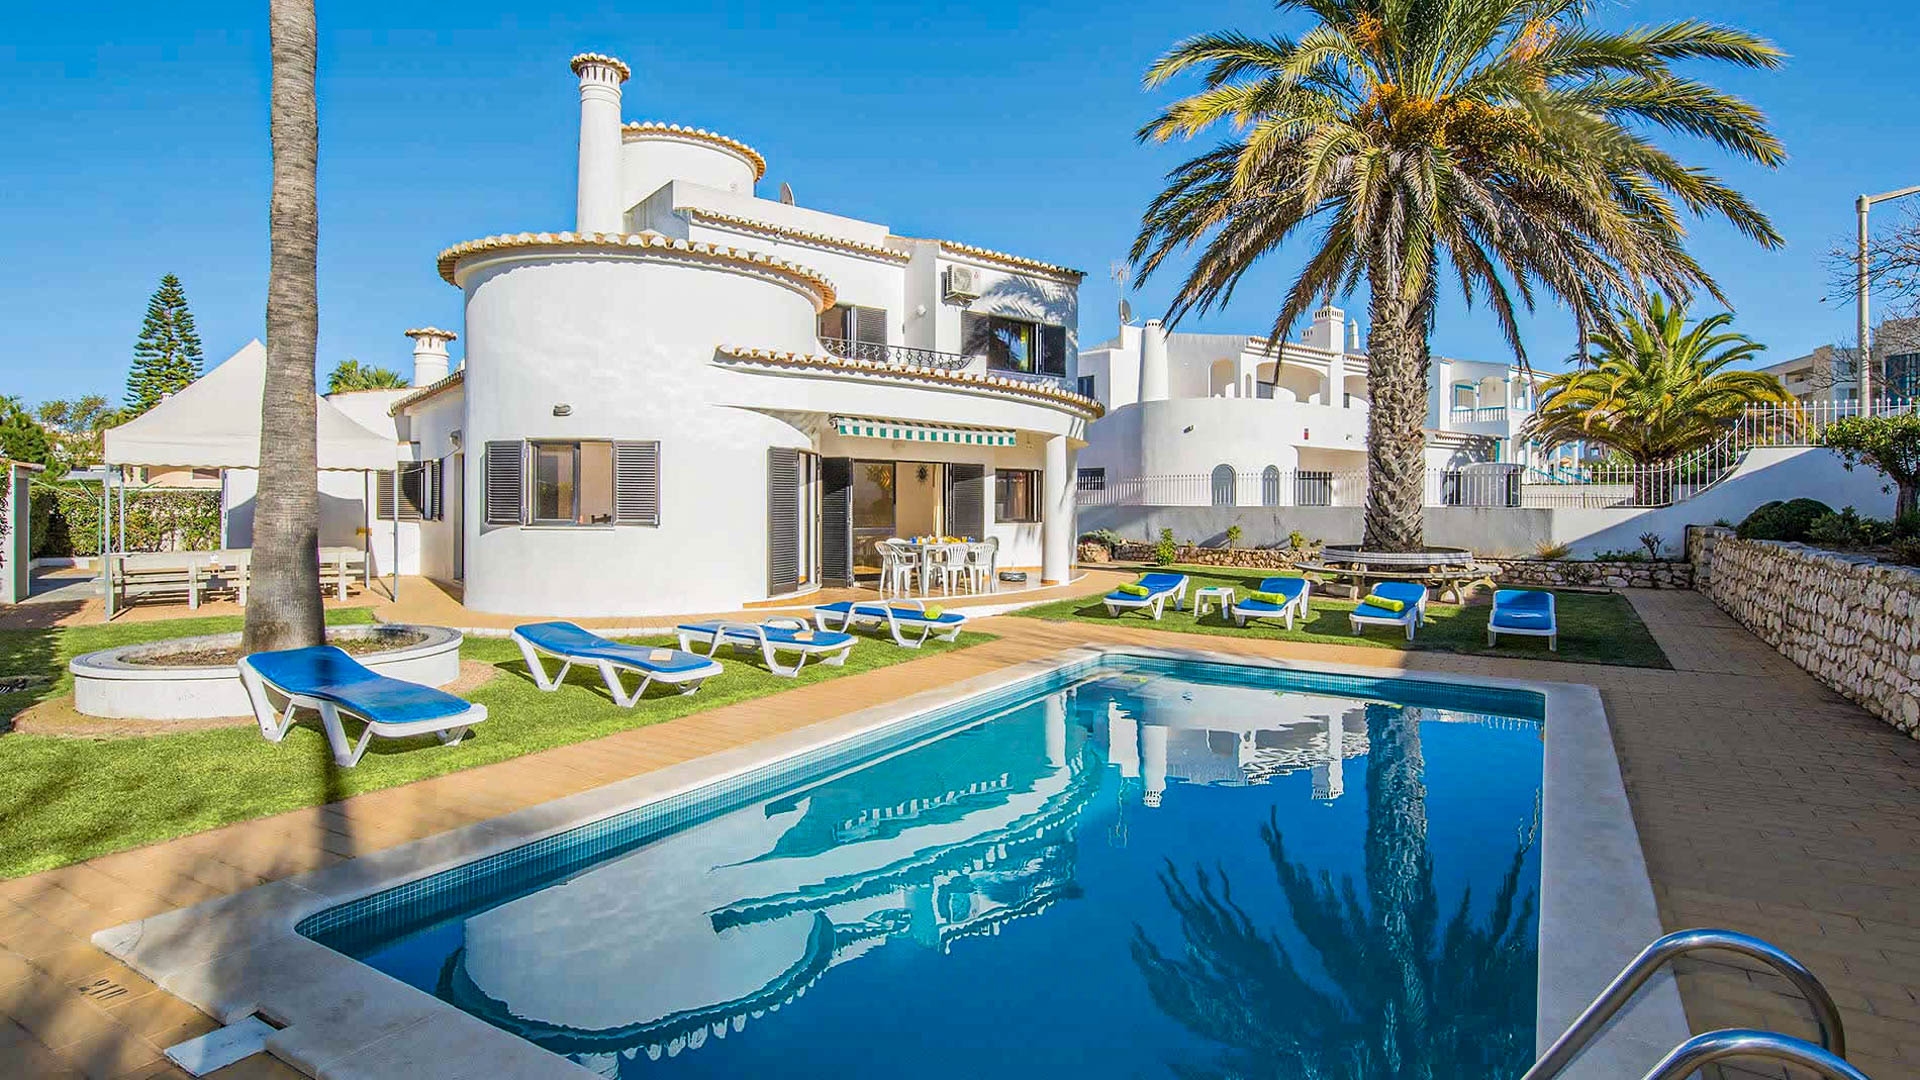 5 Bedroom Villa with Pool, easy walk to Galé beach, Guia, Albufeira | PGM1927 5-bedroom Beach Villa with Pool.  Close to the wonderful Galé beach.  Good investment opportunity.